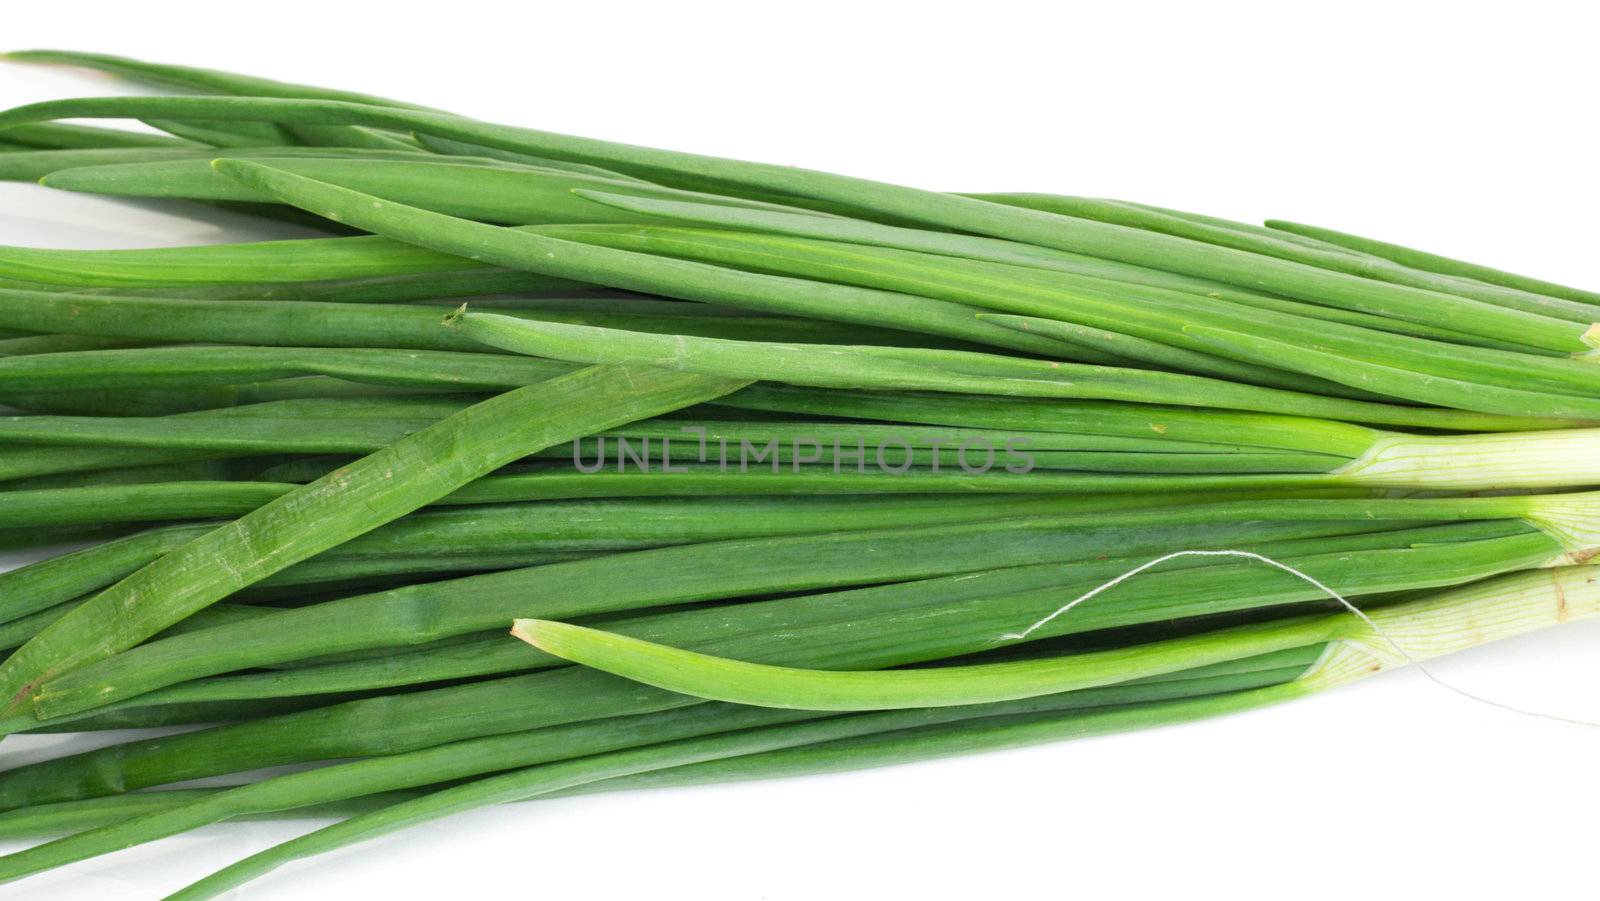 Healthy vegetable green onion isolated white on background 